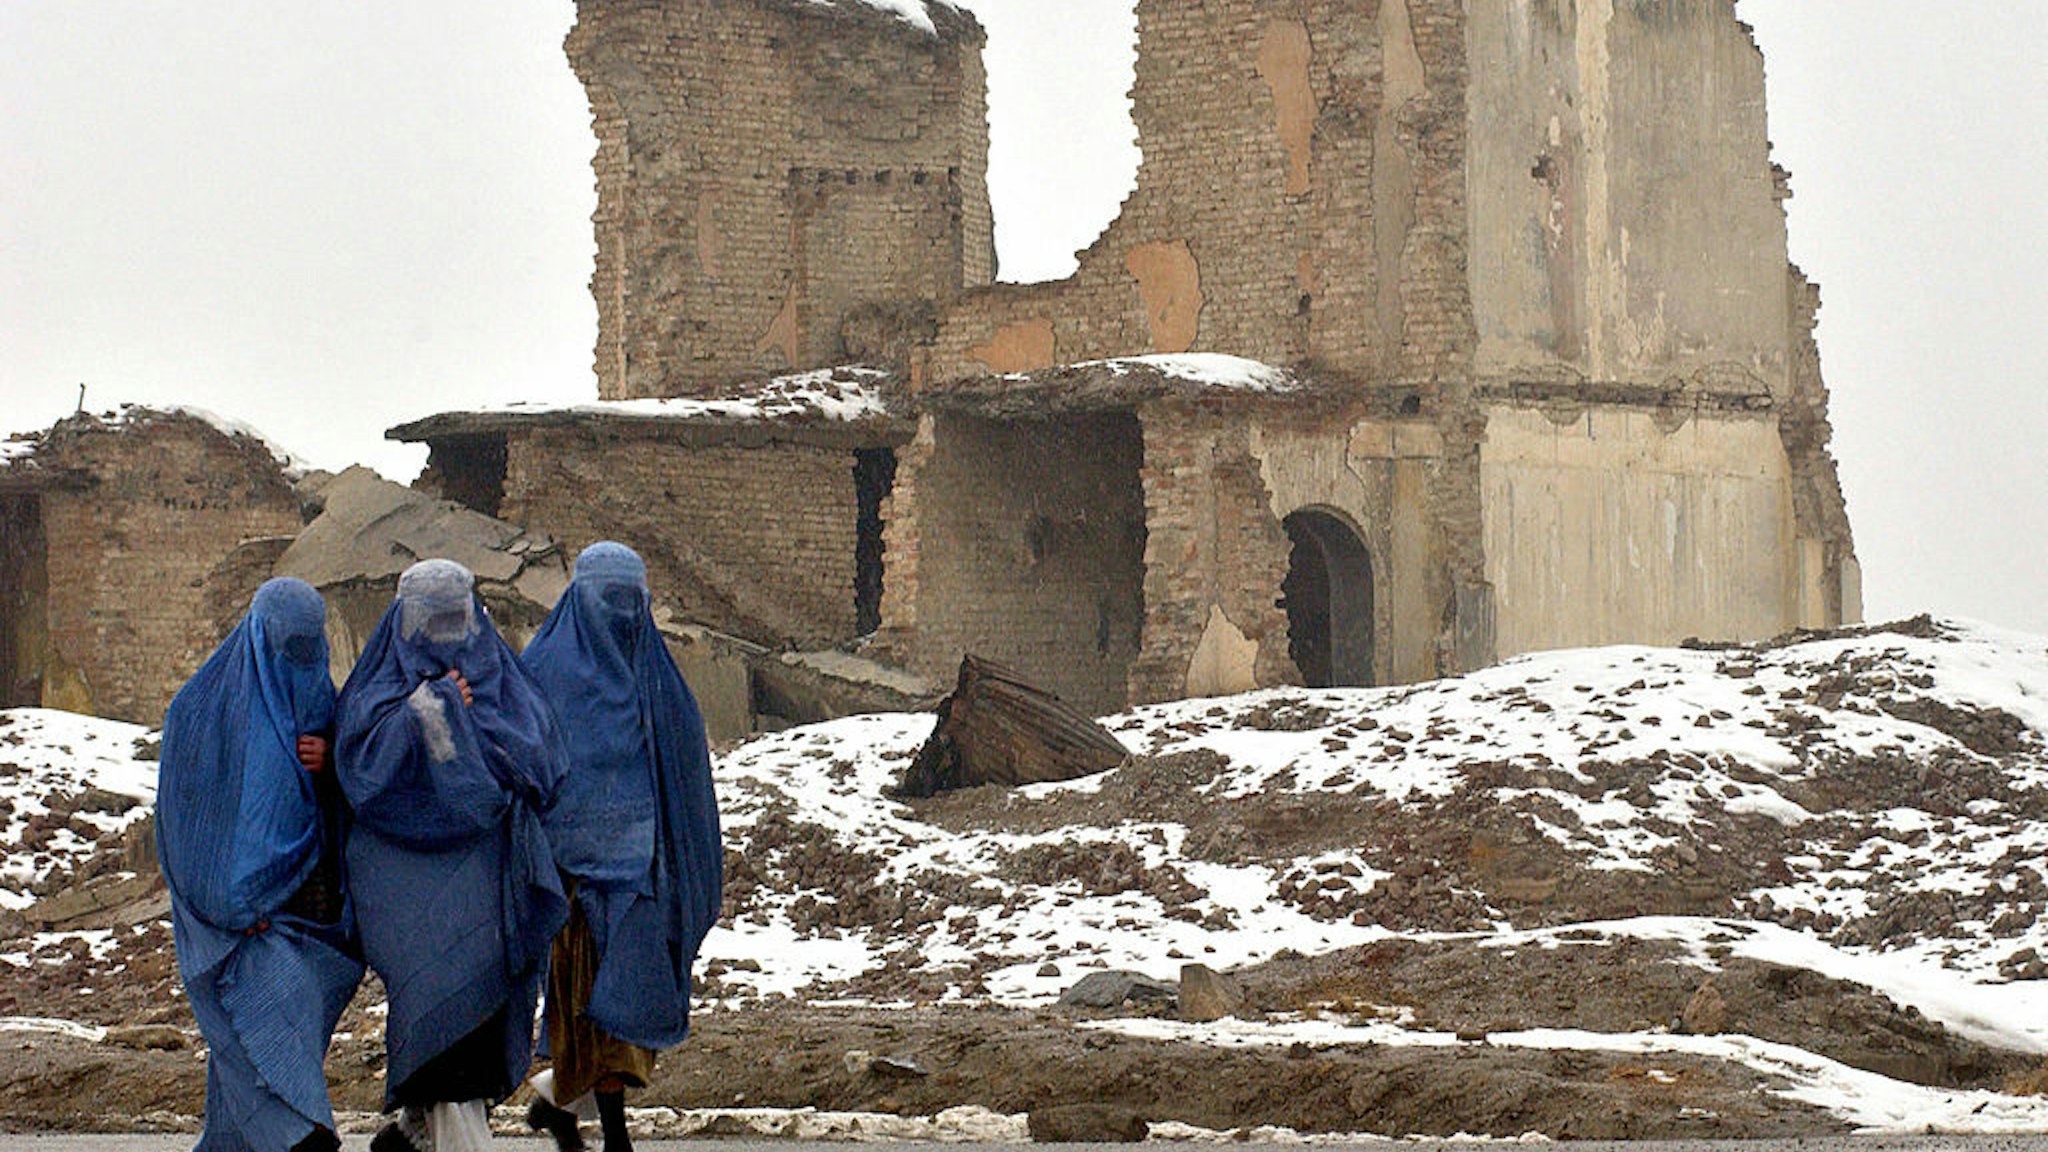 Kabul, AFGHANISTAN: Burqa clad Afghan women walk past a destroyed building in Kabul, 30 January 2006. +The United States has been Afghanistan's biggest donor since leading the war that toppled the Taliban four years ago but it now wants others to carry more of the "burden", US and European officials say.Bargaining over sharing the financial aid on which the country will be dependent for a while yet has intensified in the past months and will be taken up at the London conference on Afghanistan starting 31 January.The United States has disbursed close to five billion USD in the destitute country since 2001. AFP PHOTO/SHAH Marai (Photo credit should read SHAH MARAI/AFP via Getty Images)